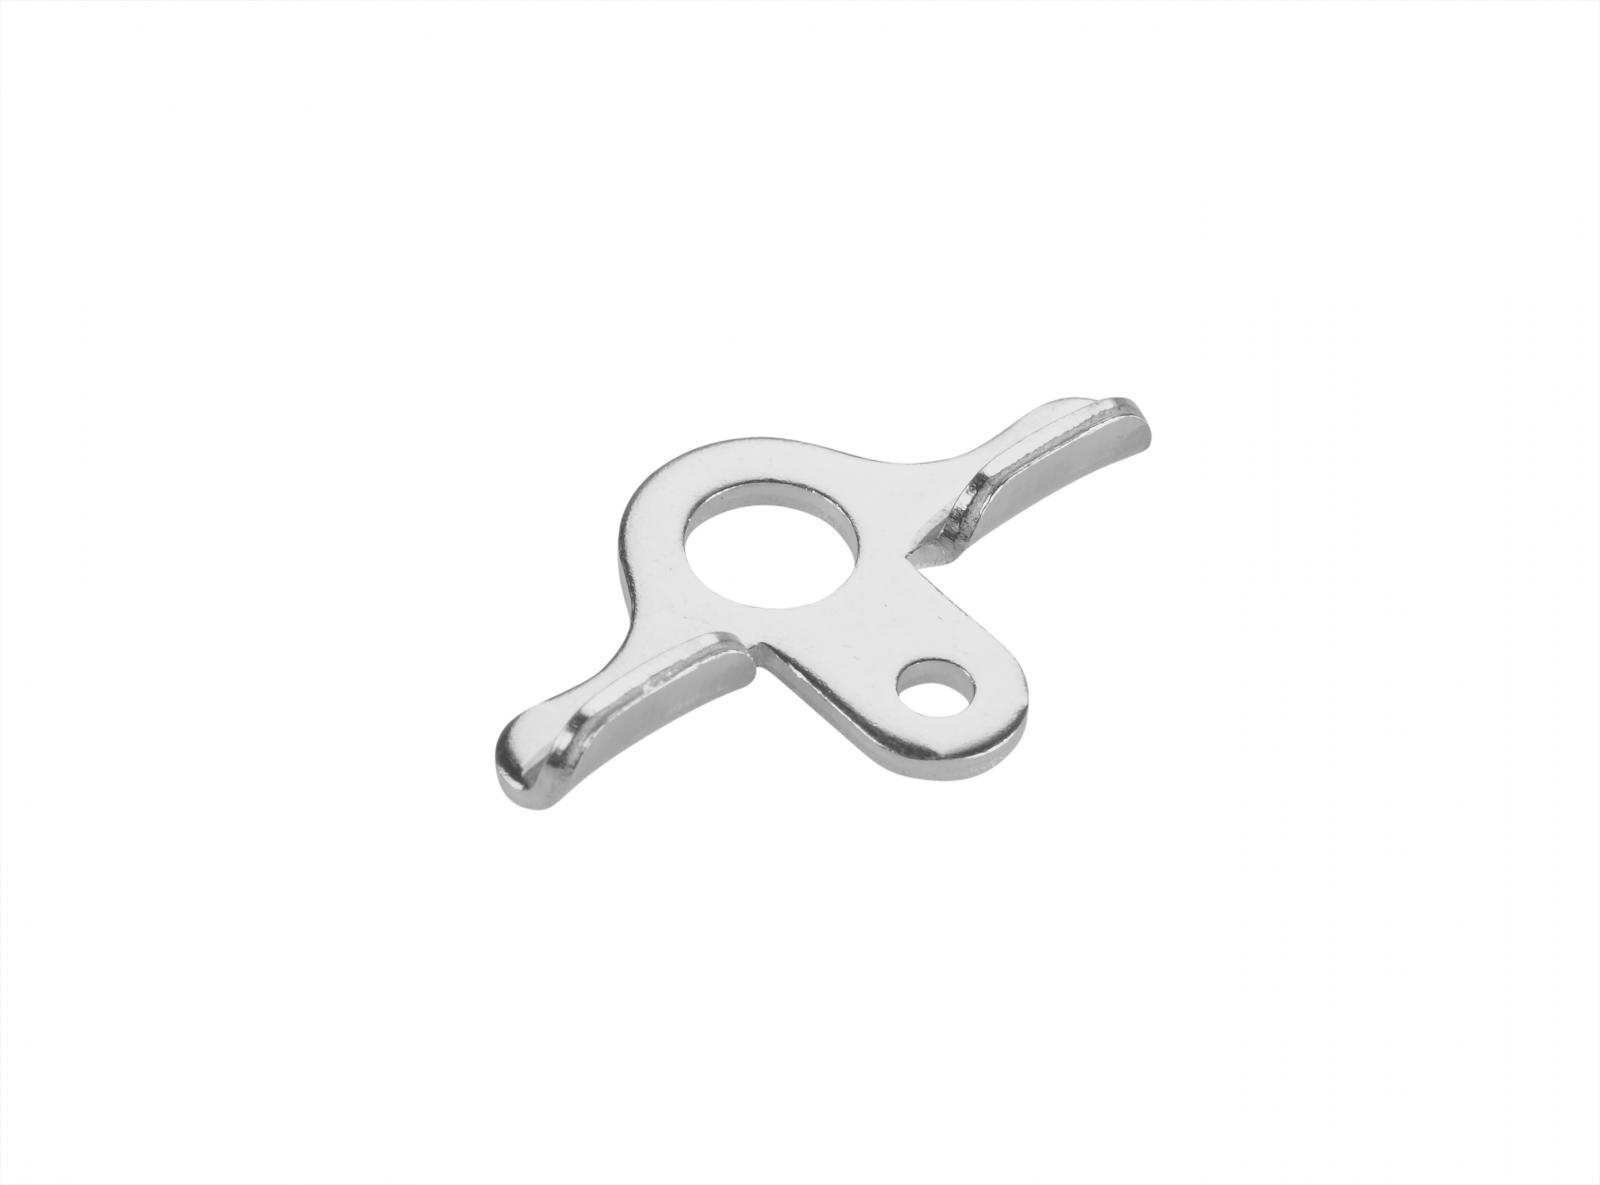 TapeTech® Power Assist Spring Hook. Part number 212086